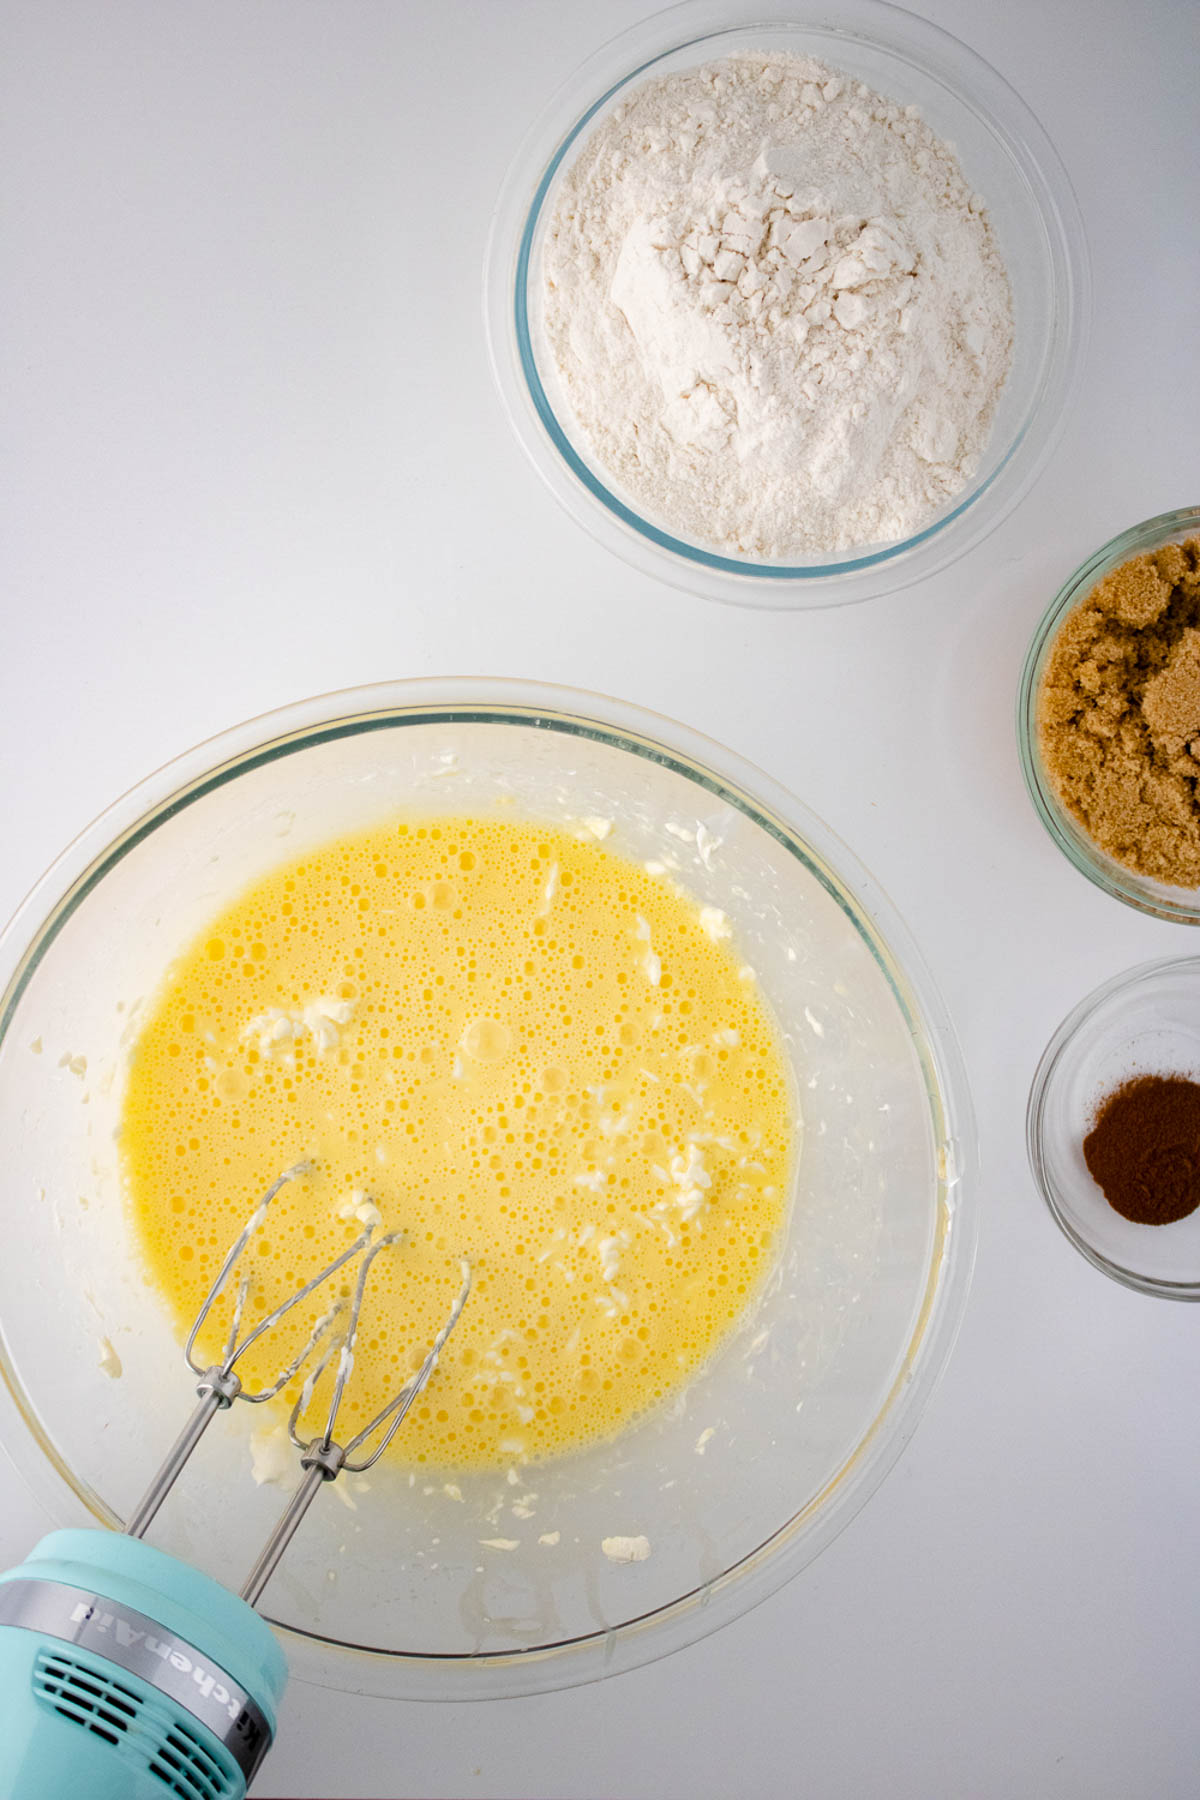 Top view of a kitchen counter with ingredients for dessert: a bowl of whisked eggs, bowls of flour, brown sugar, and cocoa powder, and a hand mixer.